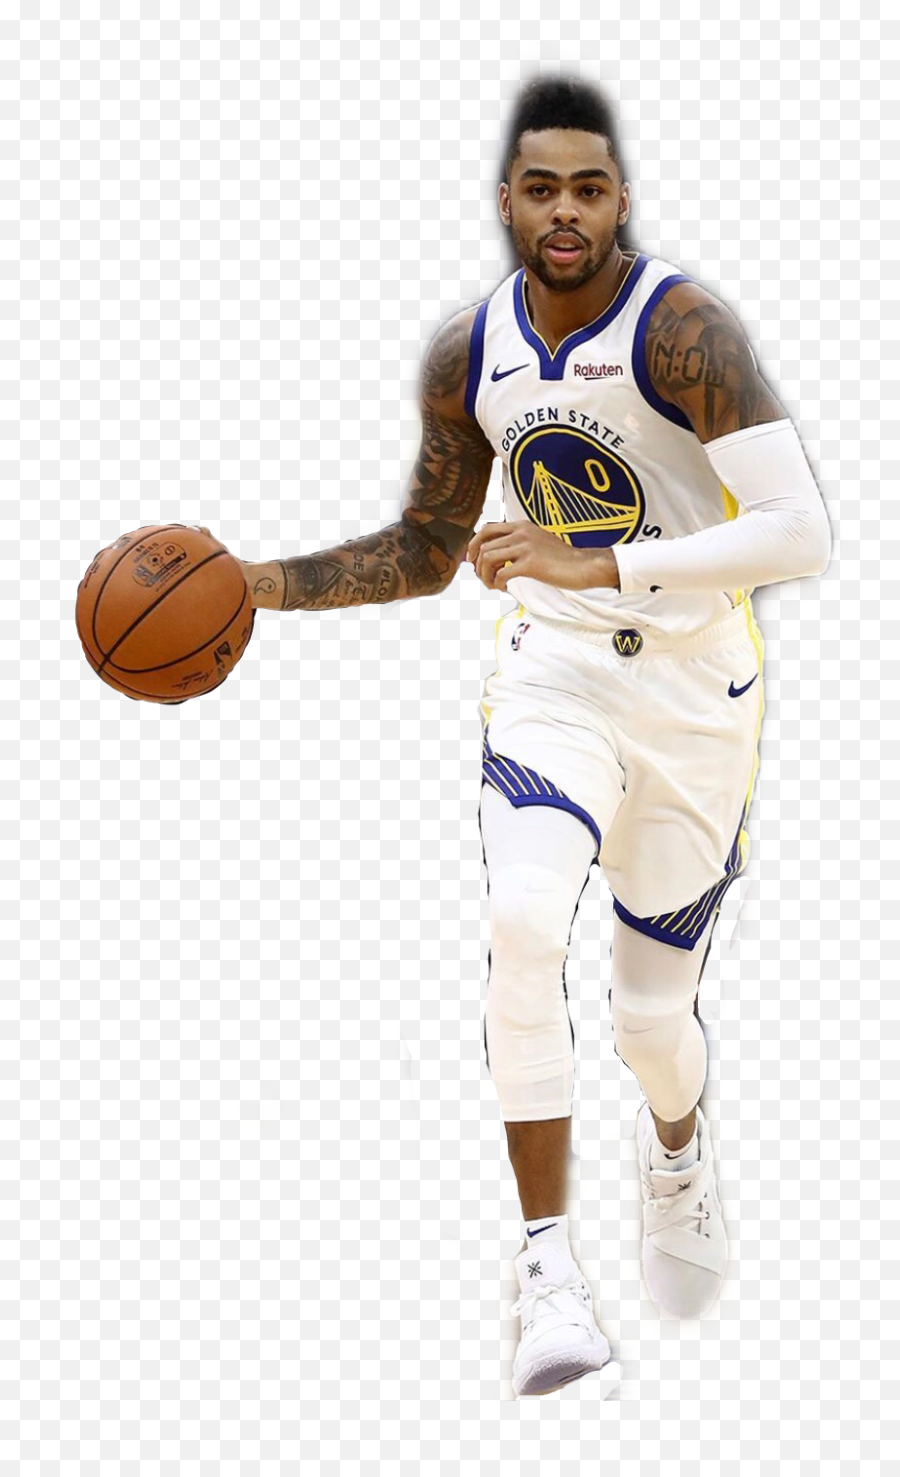 The Most Edited Basketball Player Picsart - For Basketball Emoji,Basketball Emojis Made Of Human Skin Meme